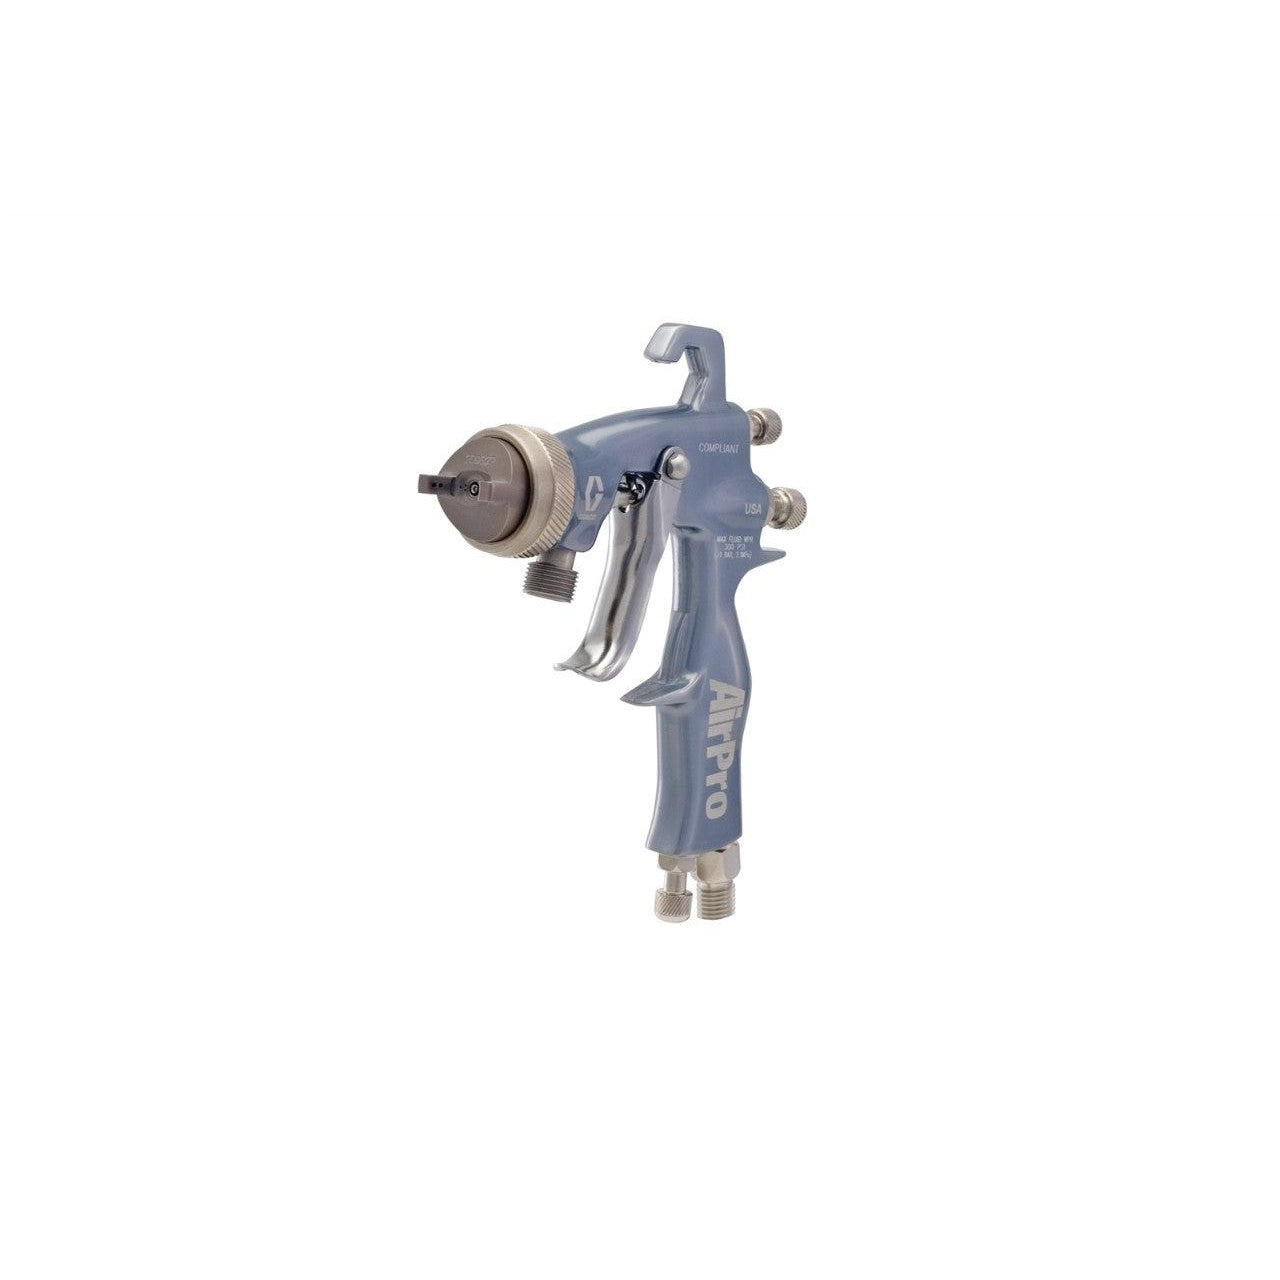 AirPro Air Spray Pressure Feed Gun, Compliant, 0.055 inch (1.4 mm) Nozzle, SST Tip, for General Metal Applications